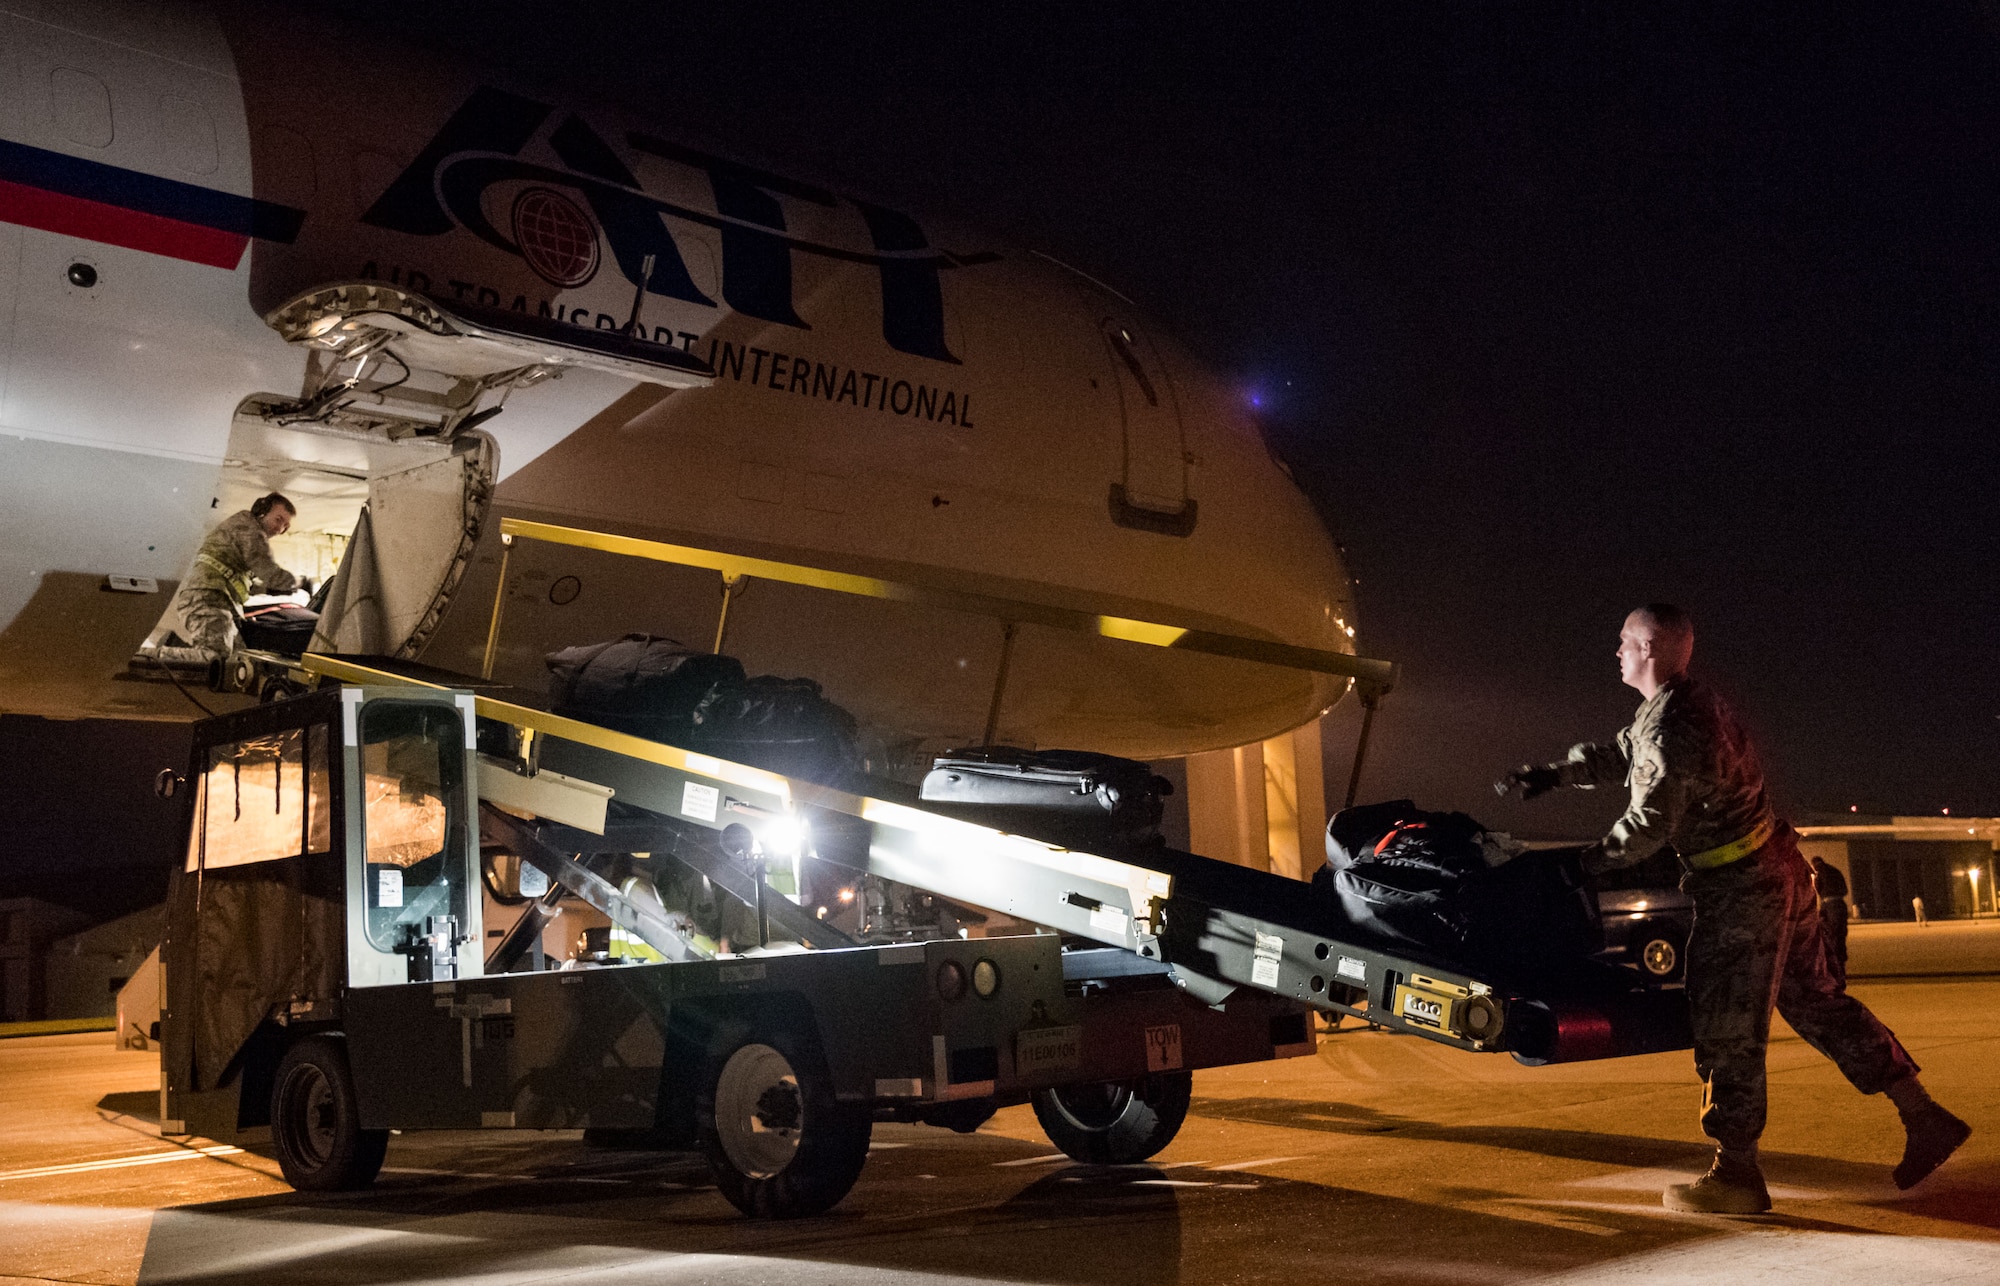 Passenger services personnel from the 436th Aerial Port Squadron load baggage into the lower cargo hold of an Air Transport International Boeing 757-200 Sept. 8, 2019, at Dover Air Force Base, Del. The ATI aircraft, part of the Civil Reserve Air Fleet program, was contracted to transport cargo and 30 Team Dover members to Fairchild AFB, Wash., participating in Mobility Guardian 2019. “Air Mobility Command’s commercial airlift partners are a vital part of our daily airlift missions around the world as well as our wartime effort,” said Maj. Adam Crane, AMC Headquarters CRAF Branch Chief, Scott AFB, Ill. (U.S. Air Force photo by Roland Balik)